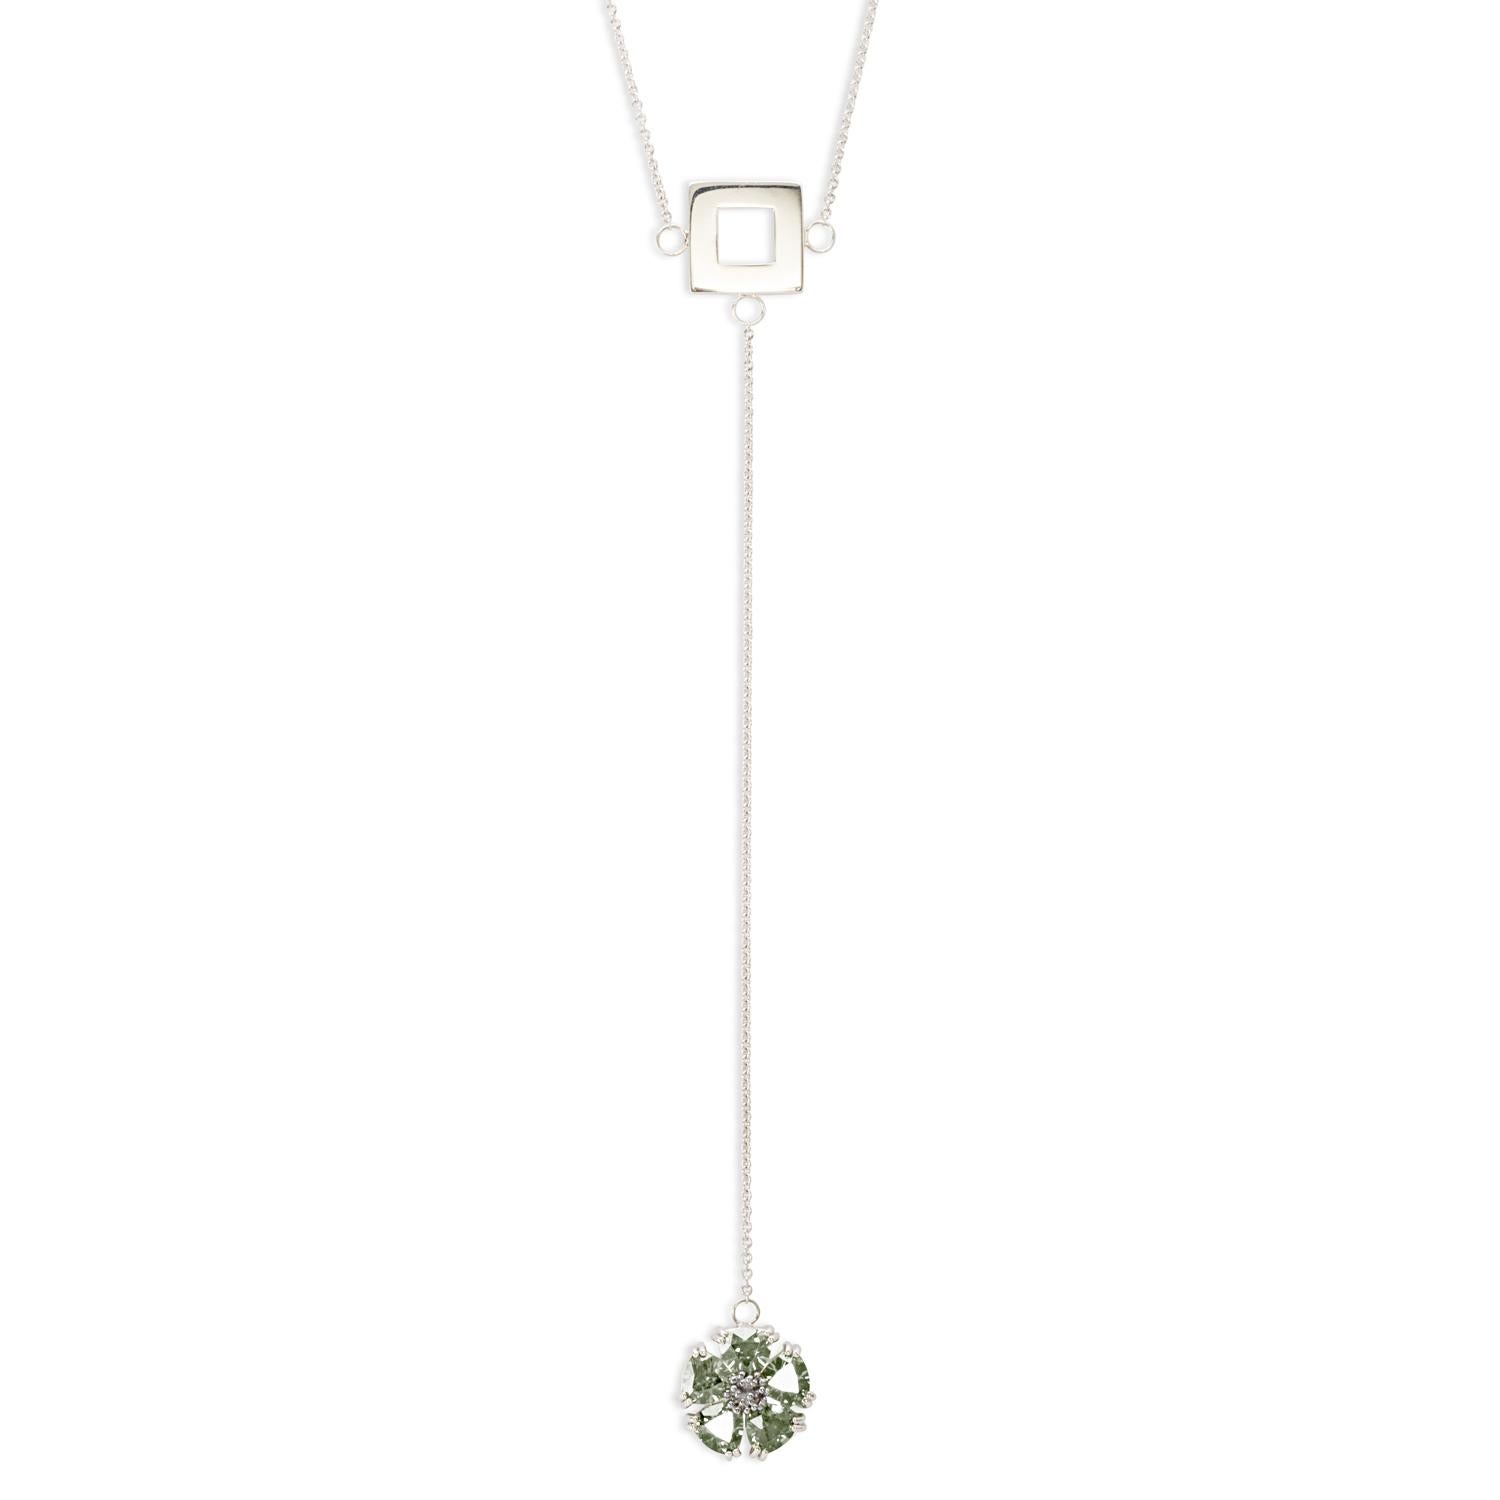 Designed in NYC

.925 Sterling Silver 5 x 7 mm Olive Peridot Blossom Stone and Square Lariat Necklace. No matter the season, allow natural beauty to surround you wherever you go. Blossom stone and square lariat necklace: 

Sterling silver